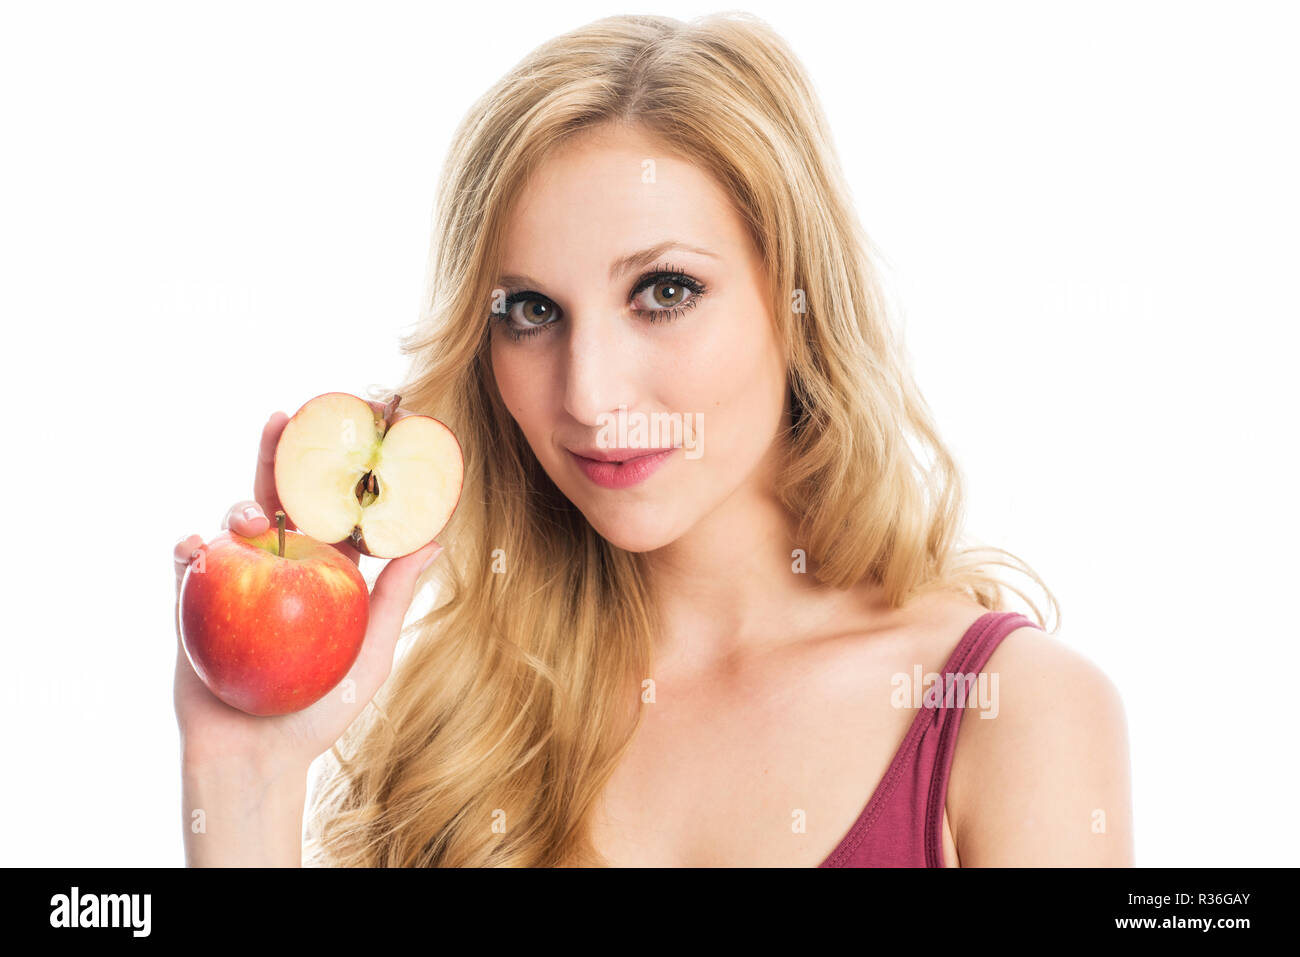 woman is holding an apple Stock Photo